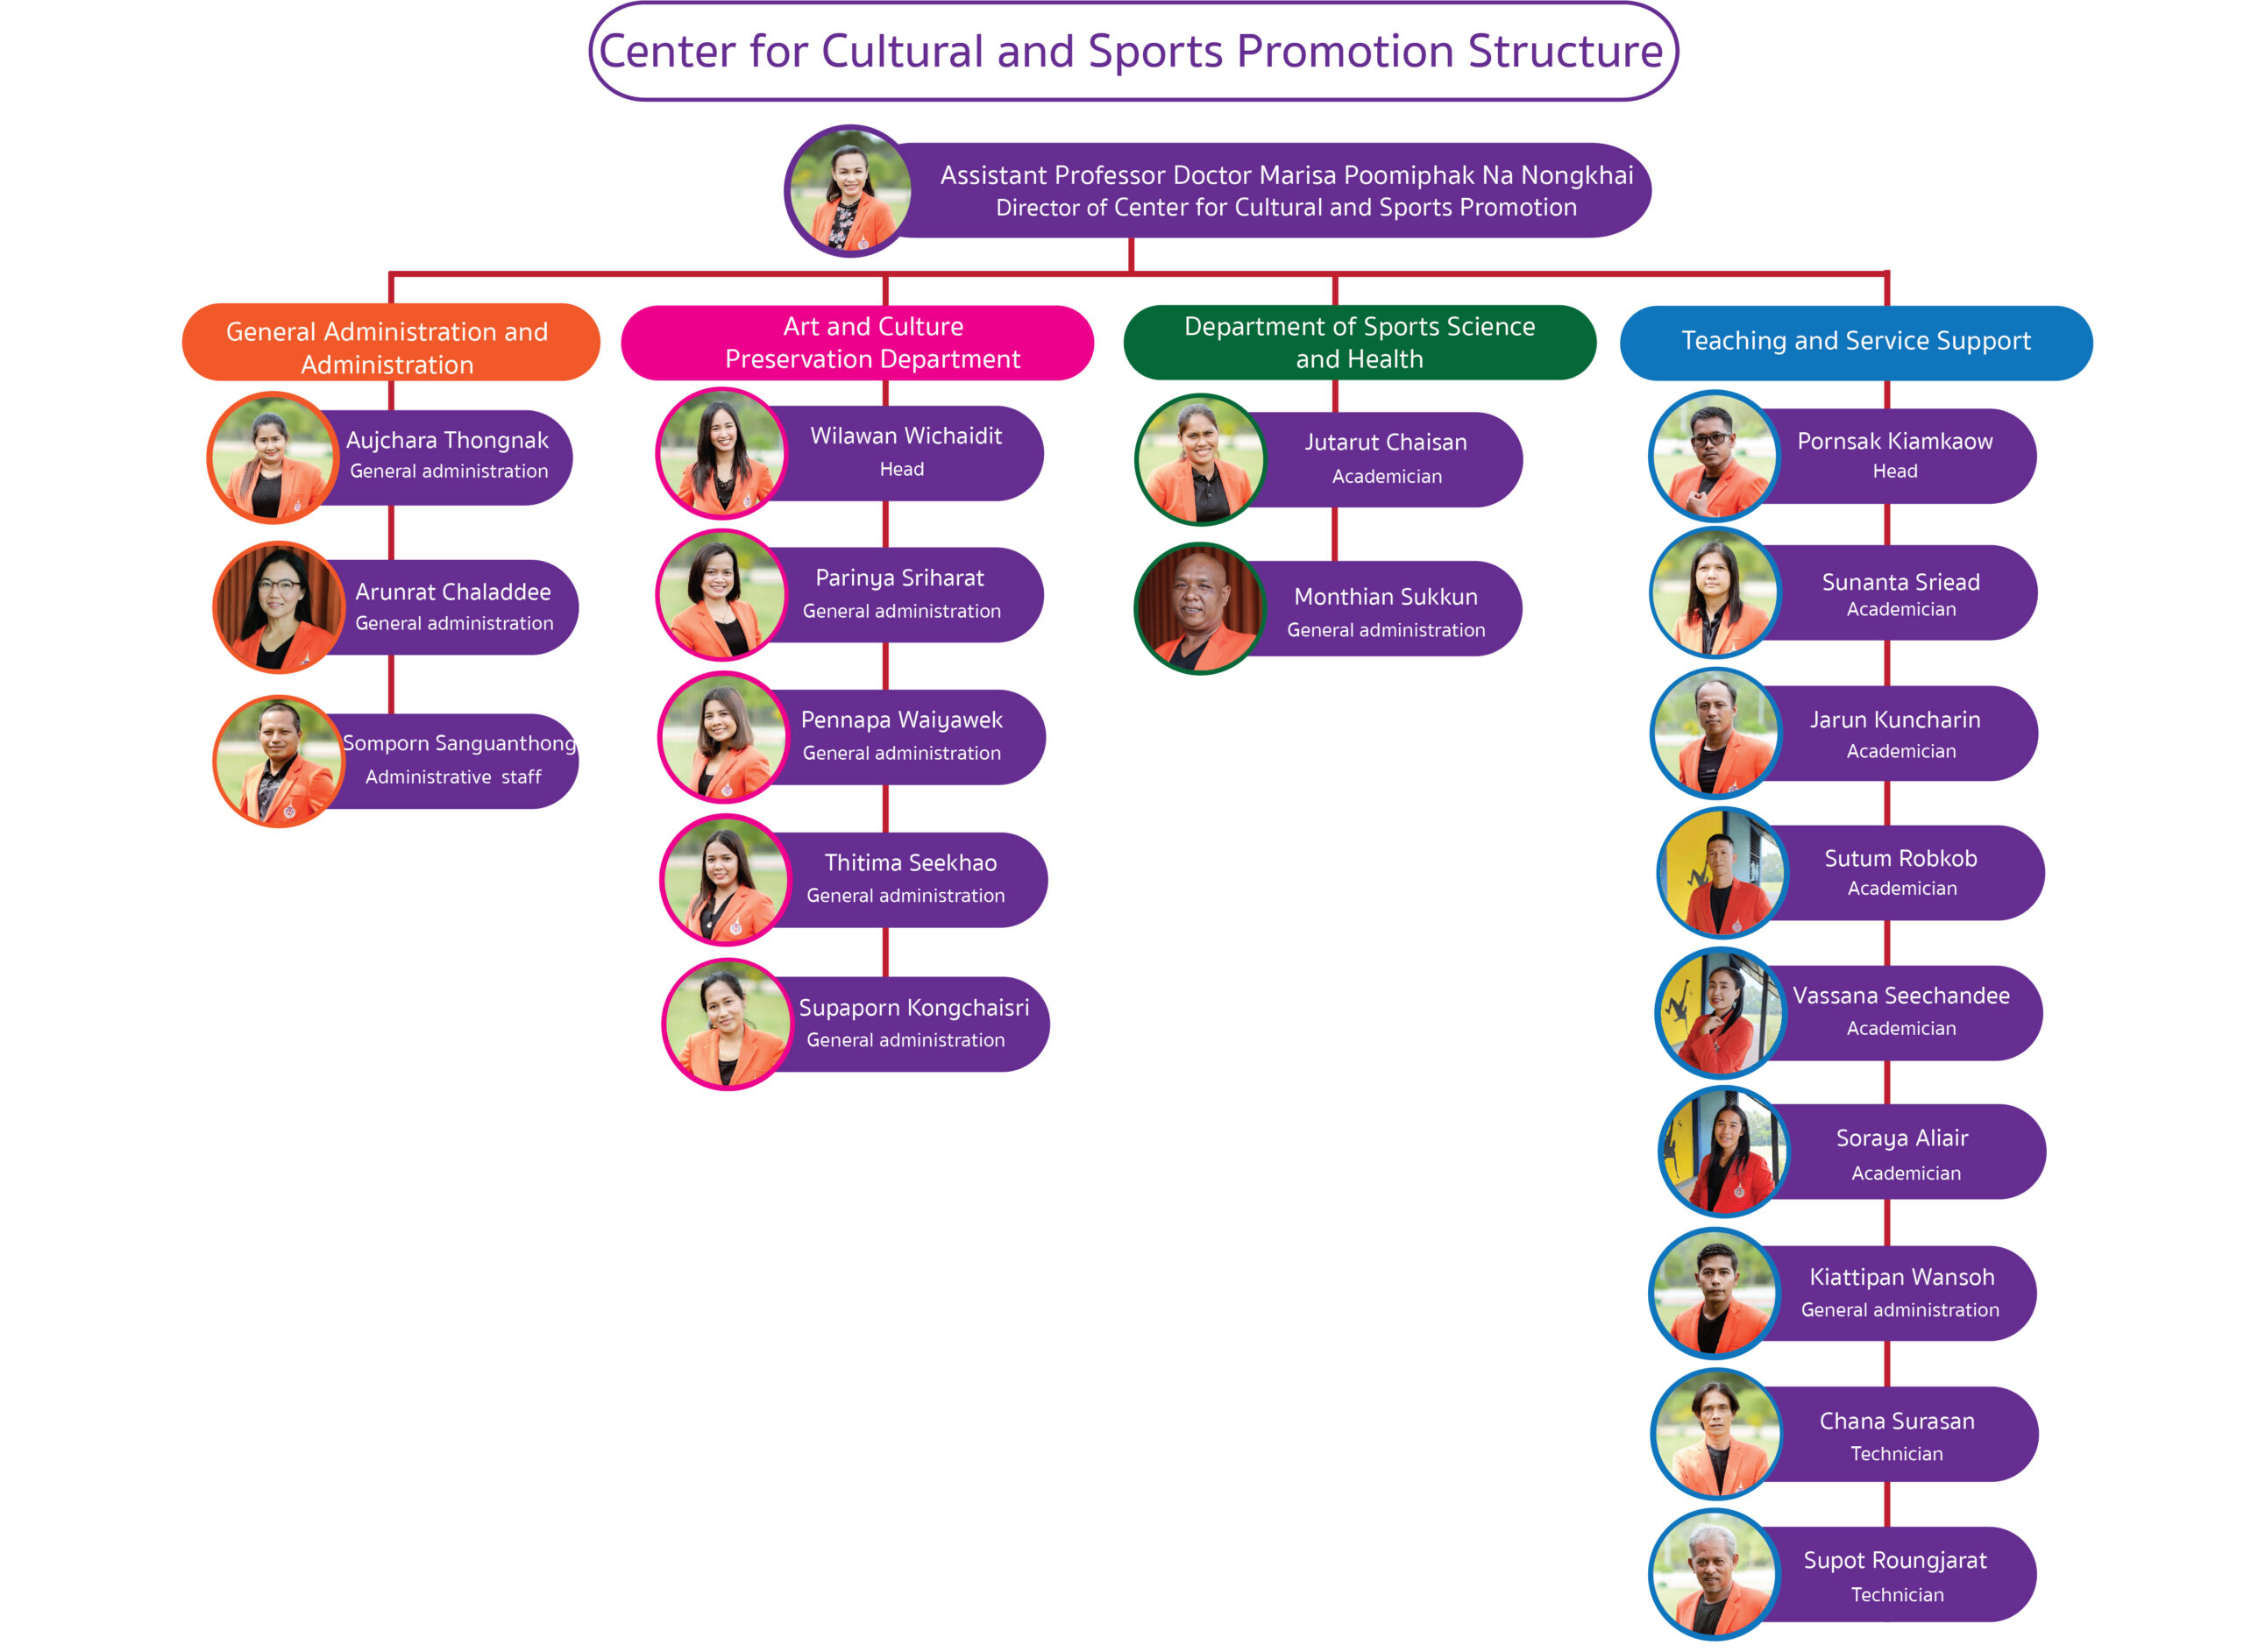 Center for Cultural and Sports Promotion Structure